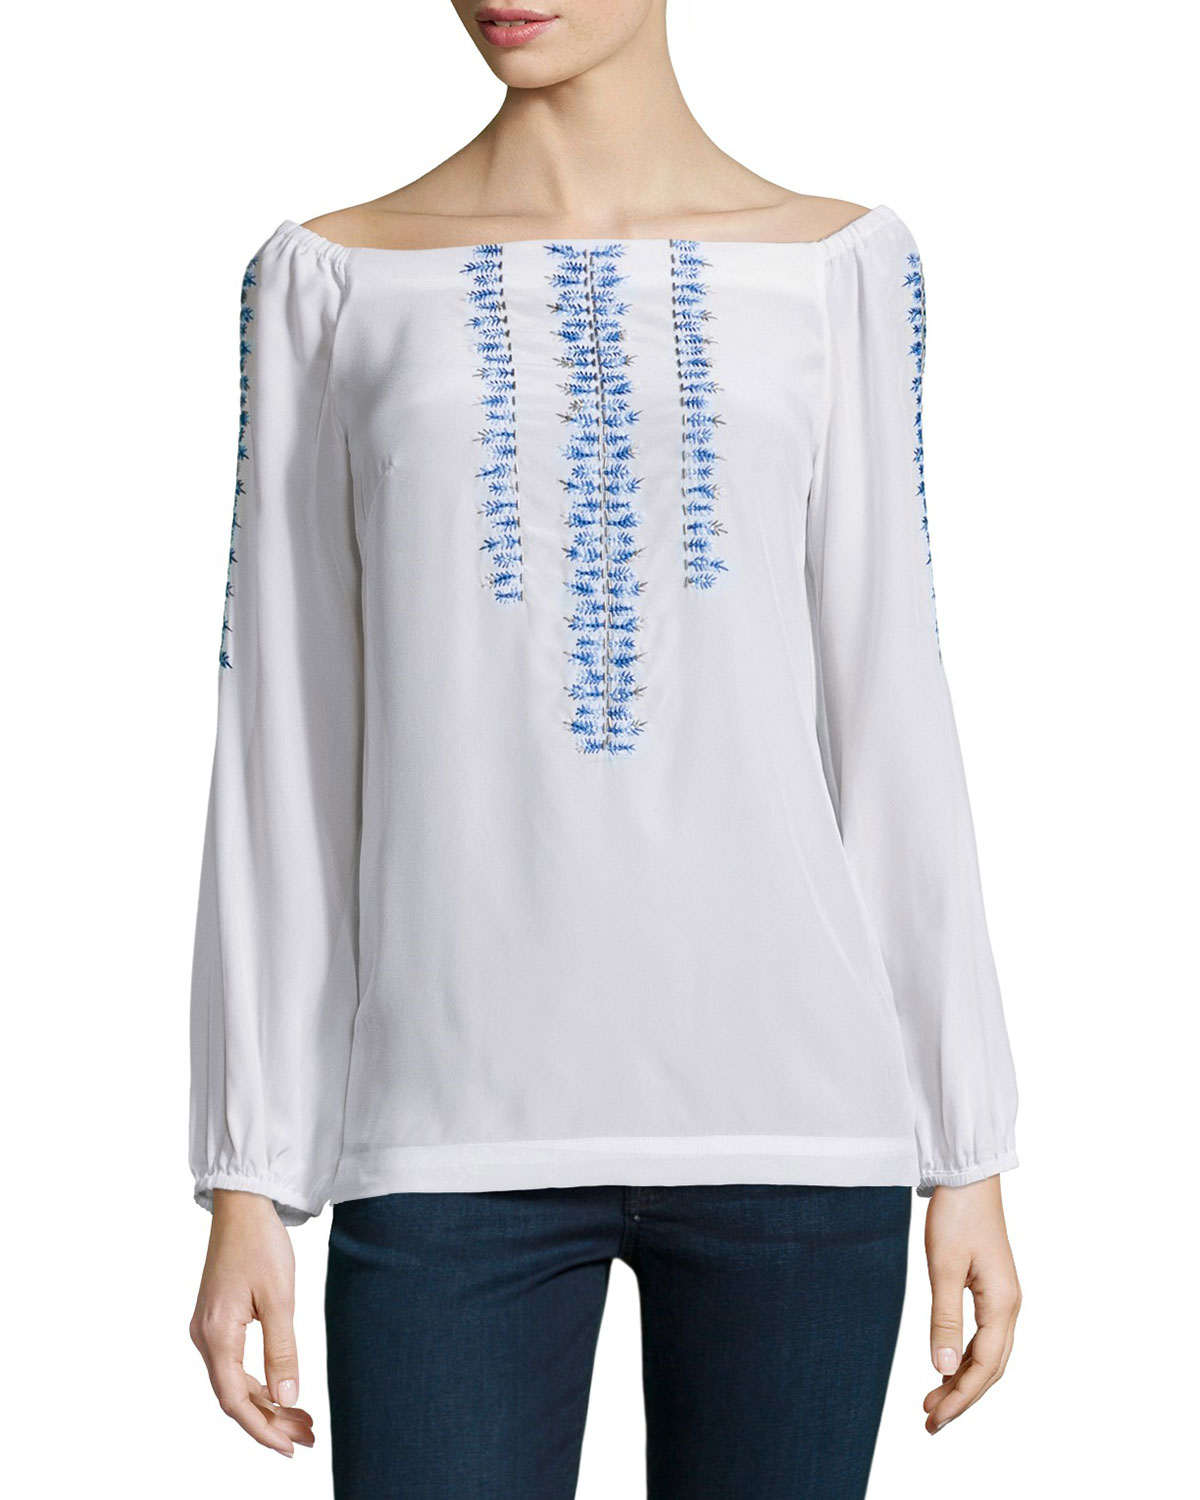 Lyst - Nanette Lepore Long-Sleeve Embroidered Peasant Top in White